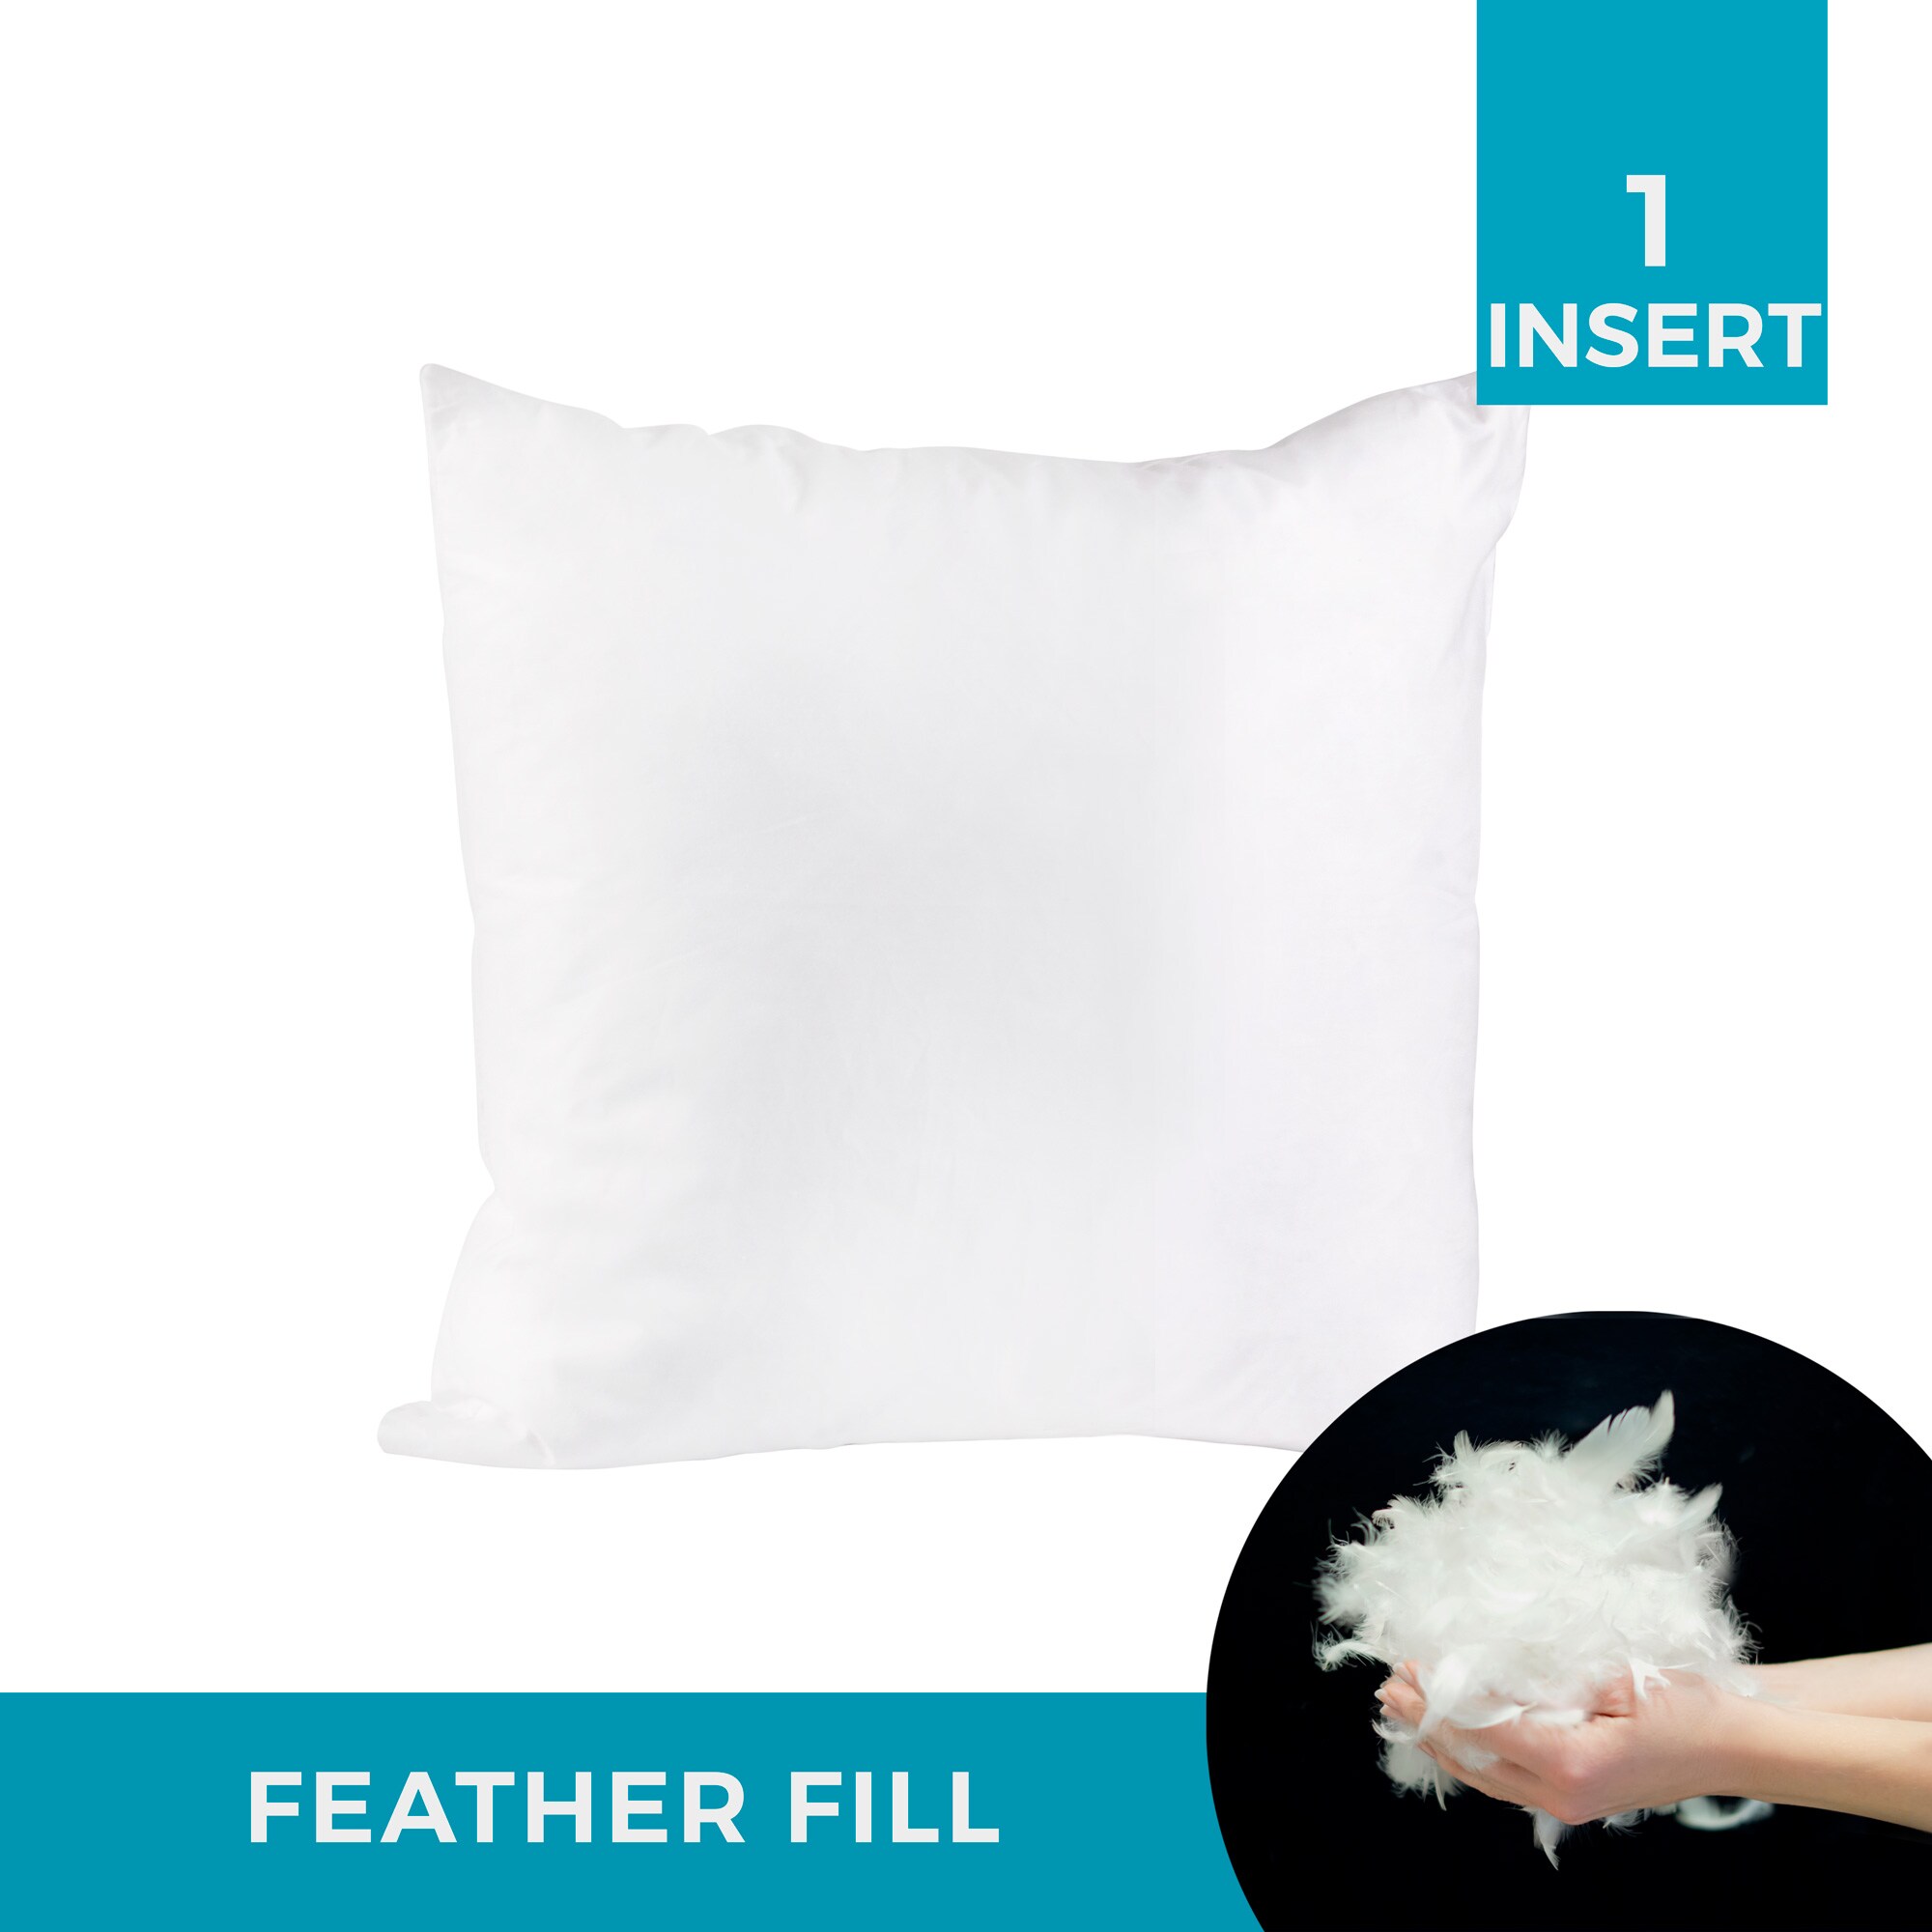 Swift Home Cotton Blend Pillow Insert 2-Pack 12-in x 12-in White Indoor Decorative  Insert in the Throw Pillows department at